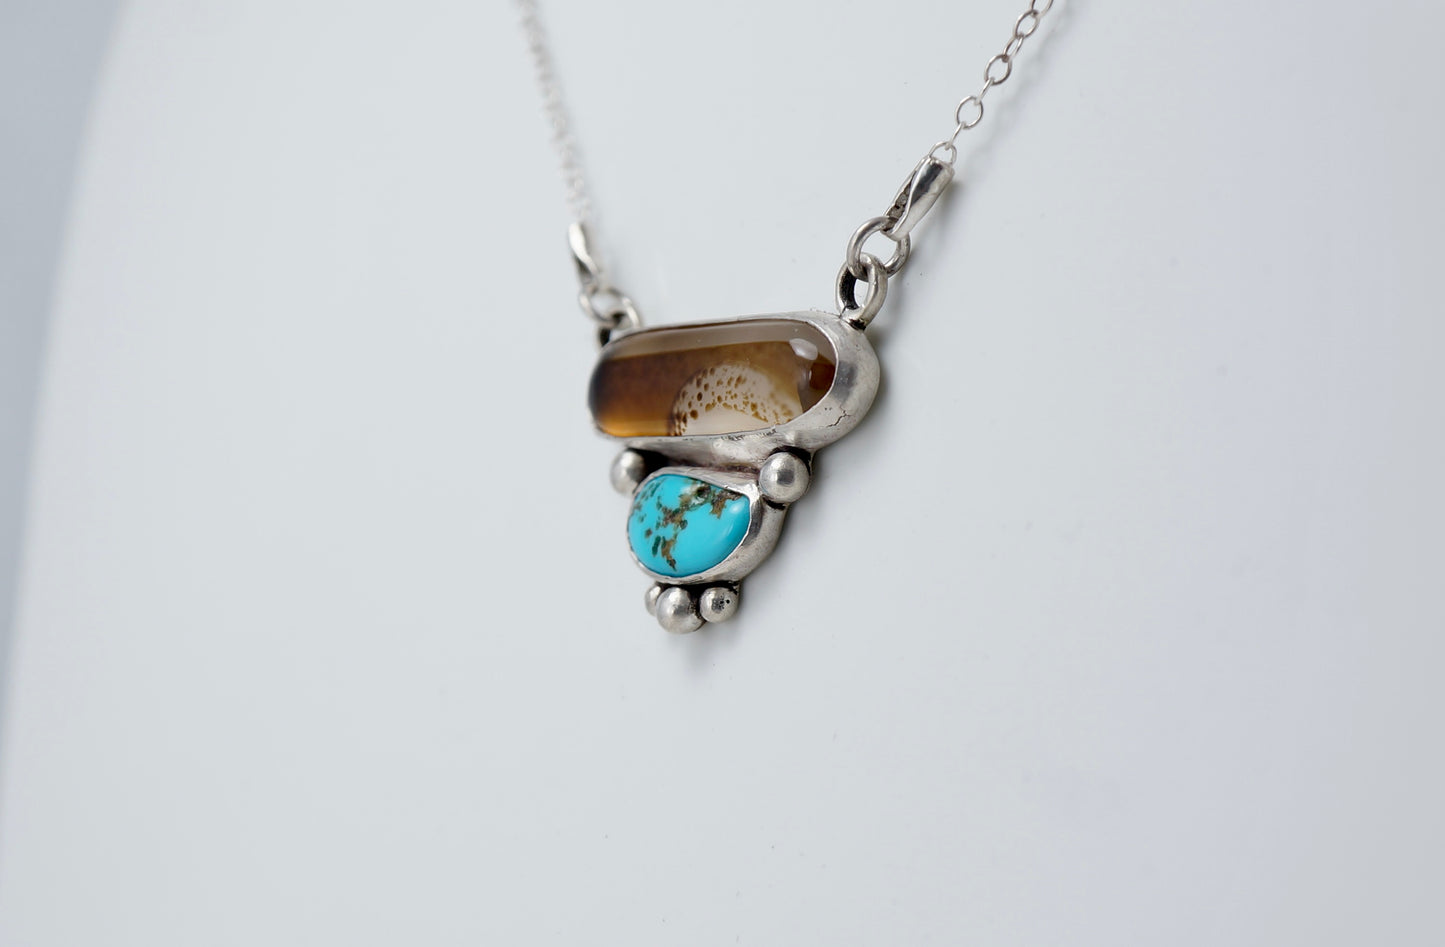 Montana Agate and Turquoise Necklace